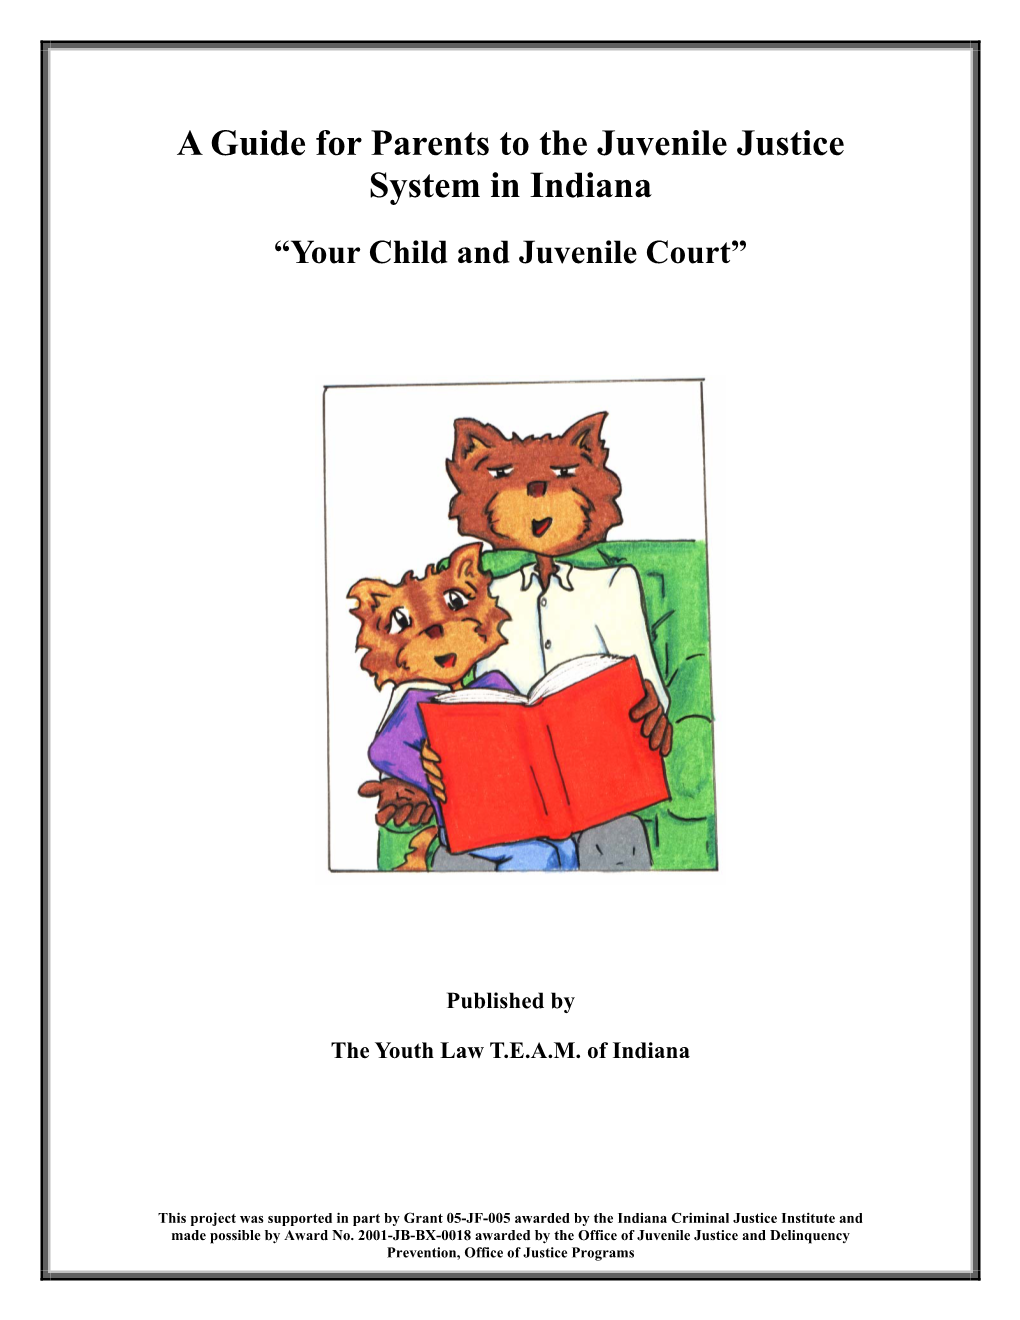 A Guide for Parents to the Juvenile Justice System in Indiana